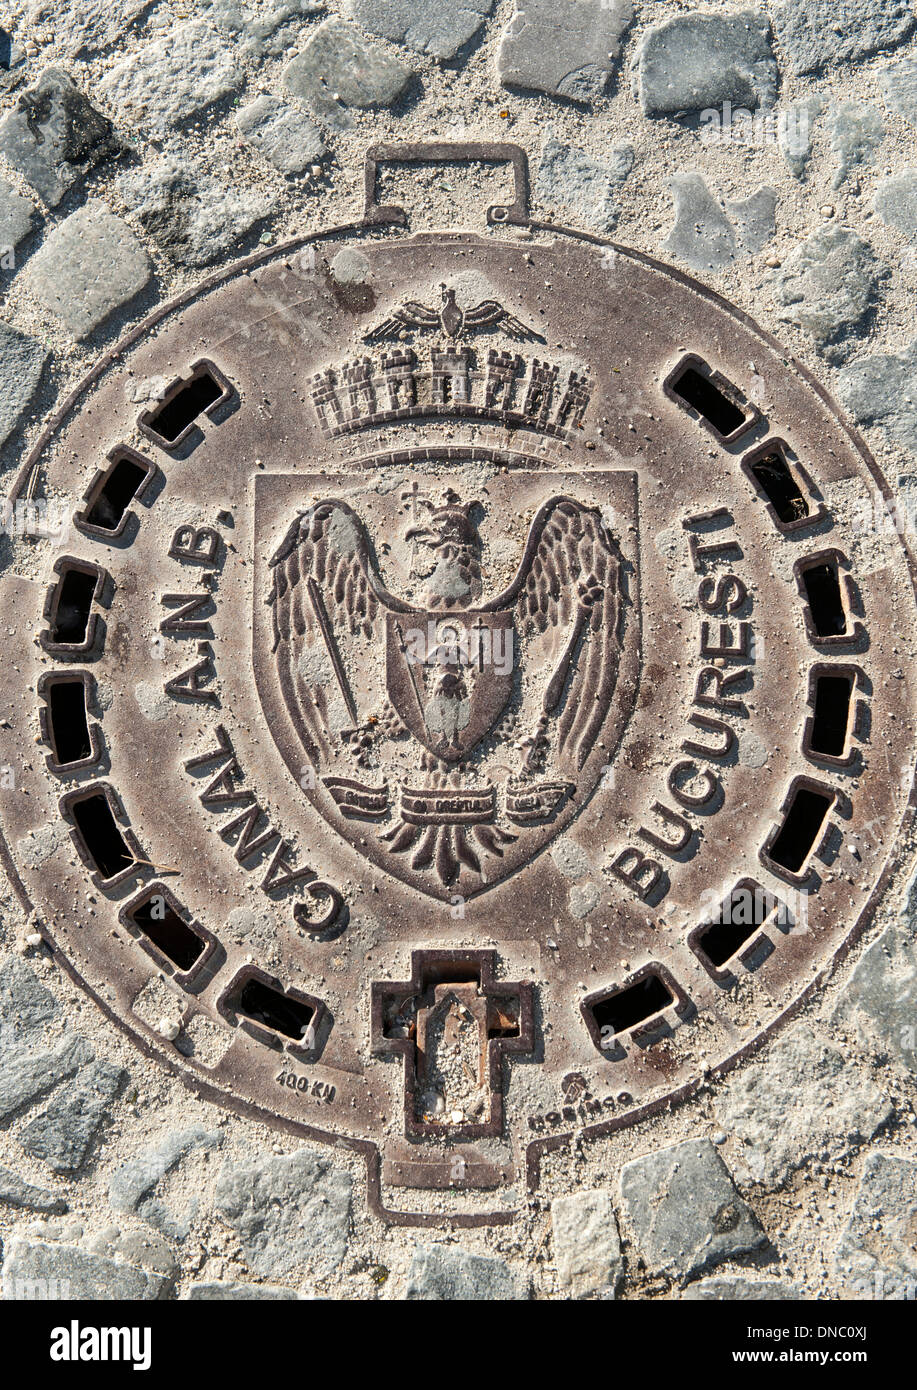 Manhole cover in Bucharest, the capital of Romania. It is inscribed with the coat of arms of the city. Stock Photo